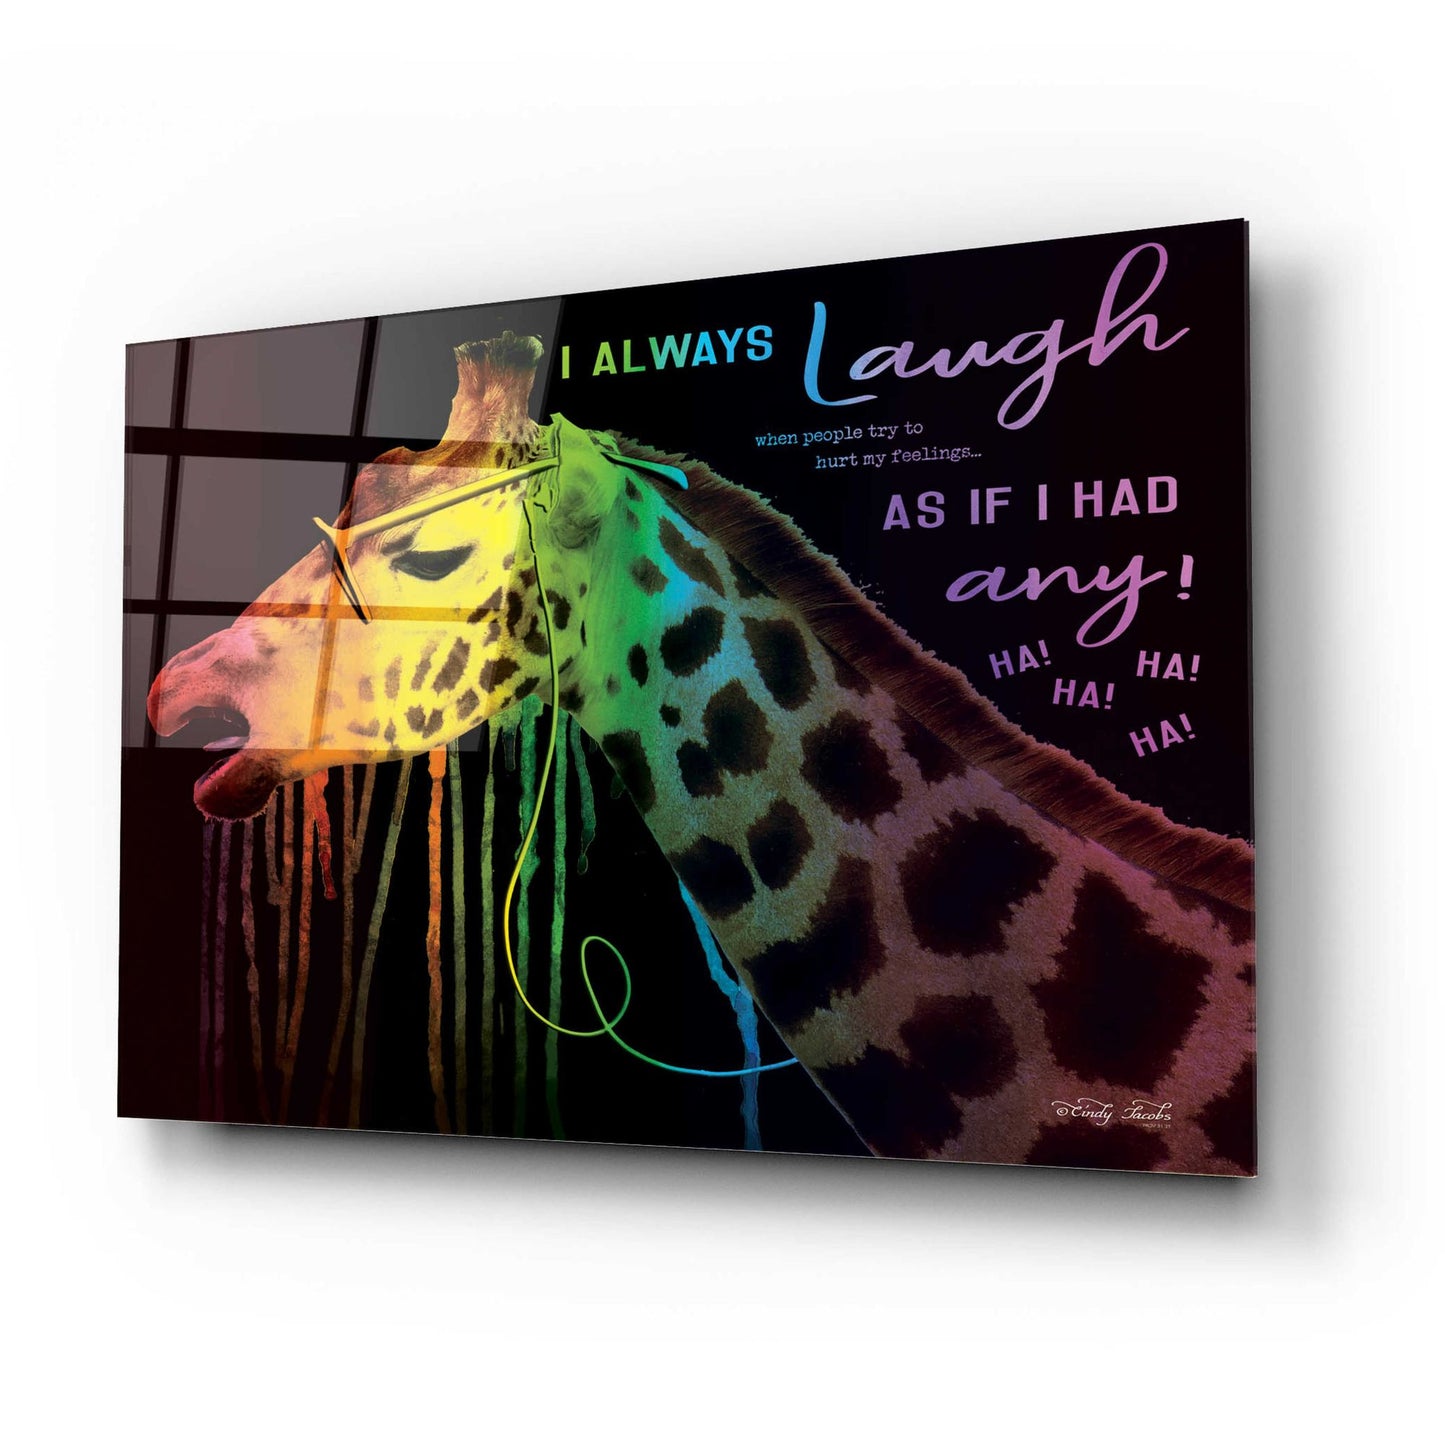 Epic Art 'I Always Laugh' by Cindy Jacobs, Acrylic Glass Wall Art,24x16